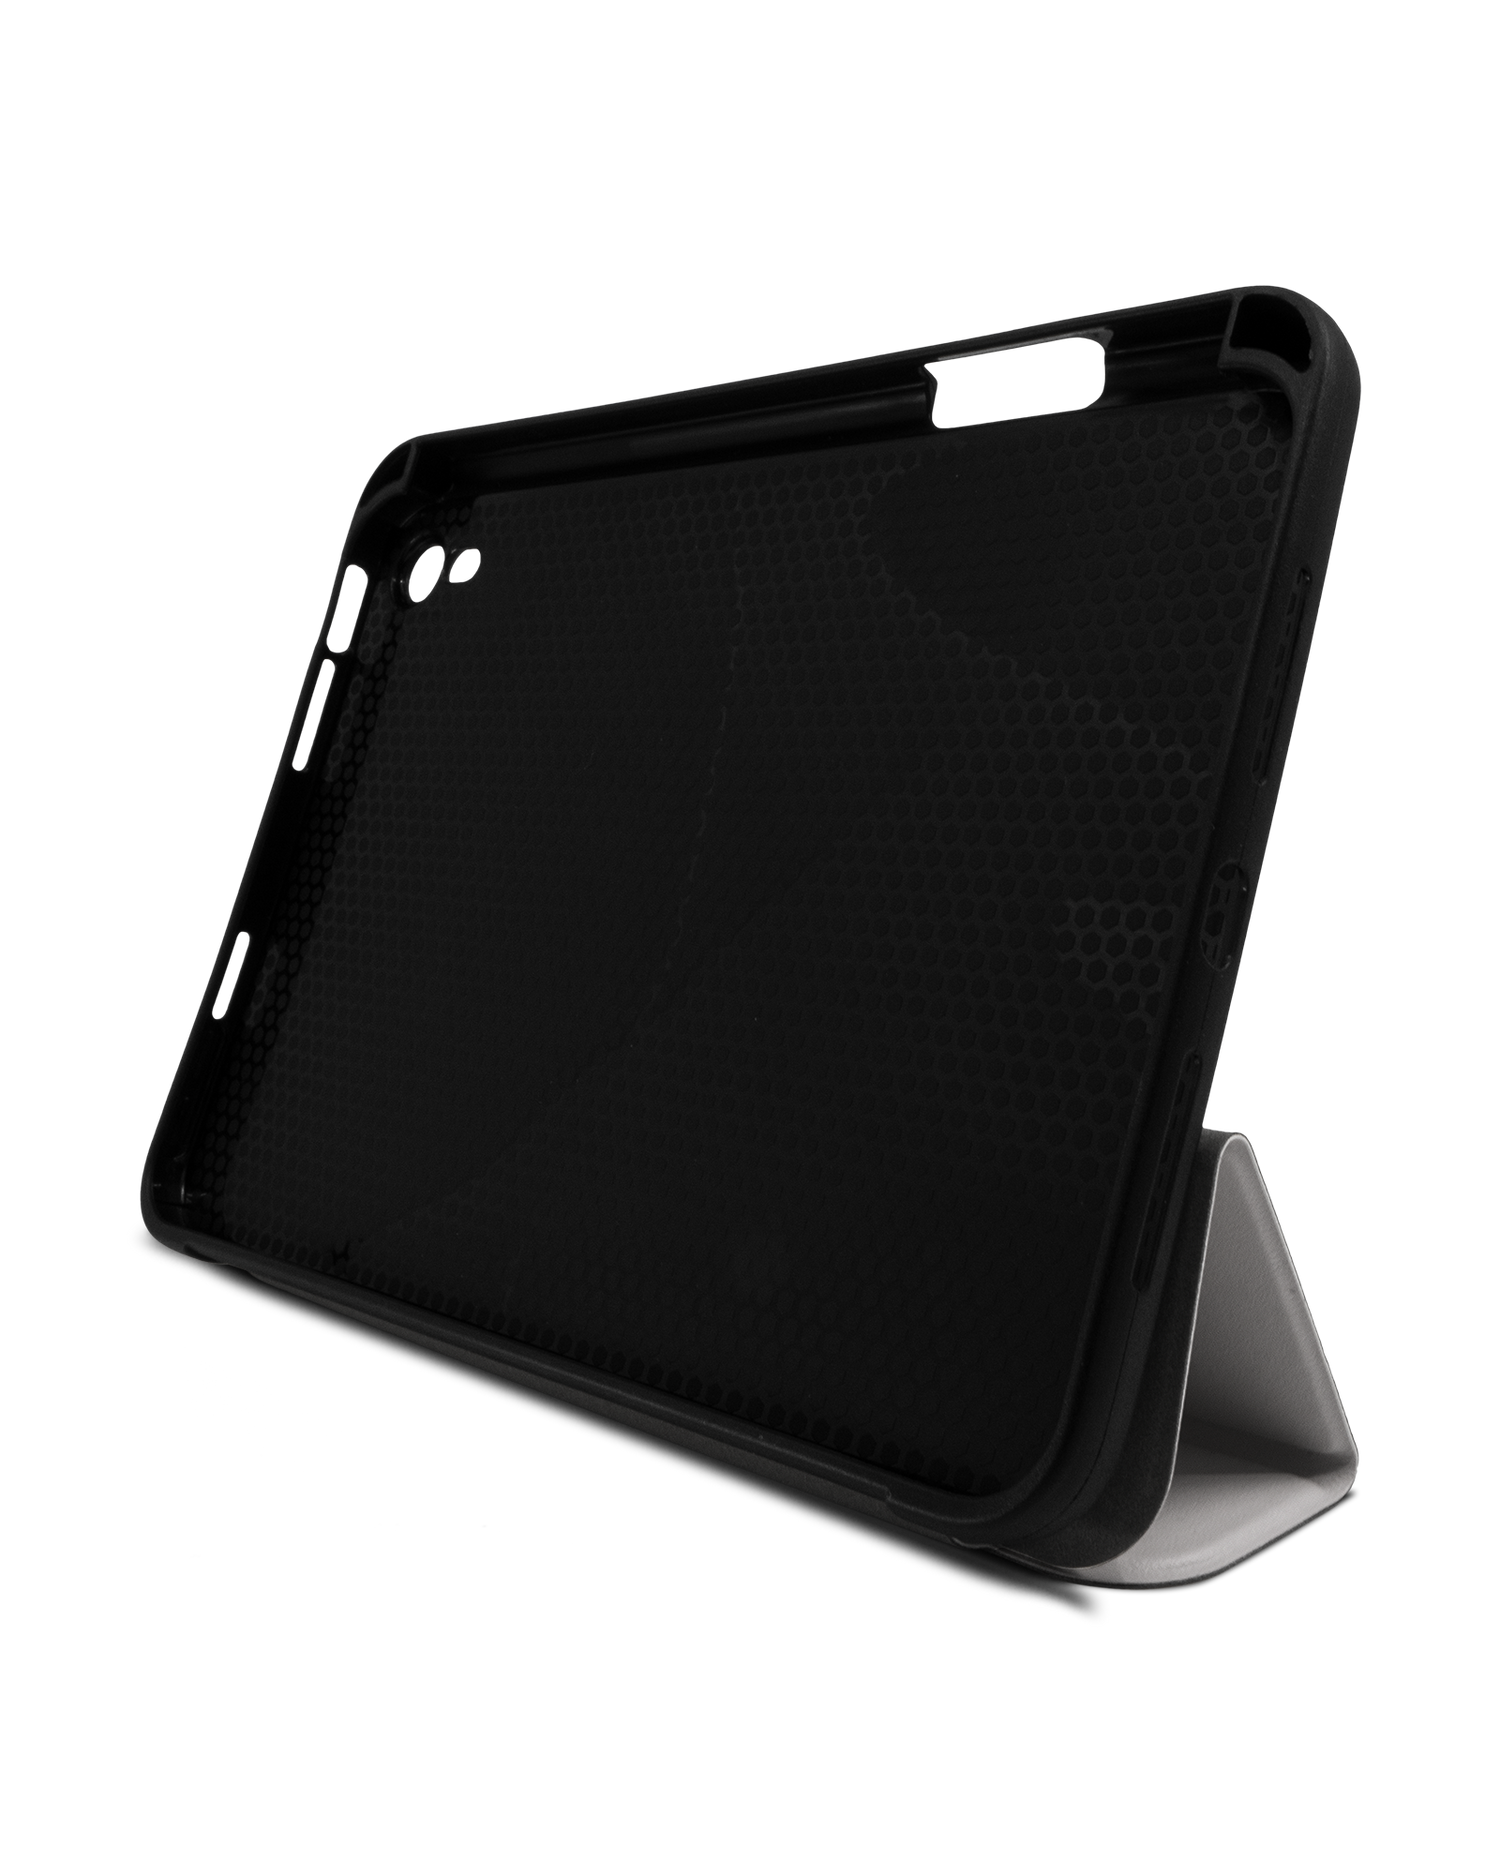 Fall Fog iPad Case with Pencil Holder Apple iPad mini 6 (2021): Set up in landscape format (front view)